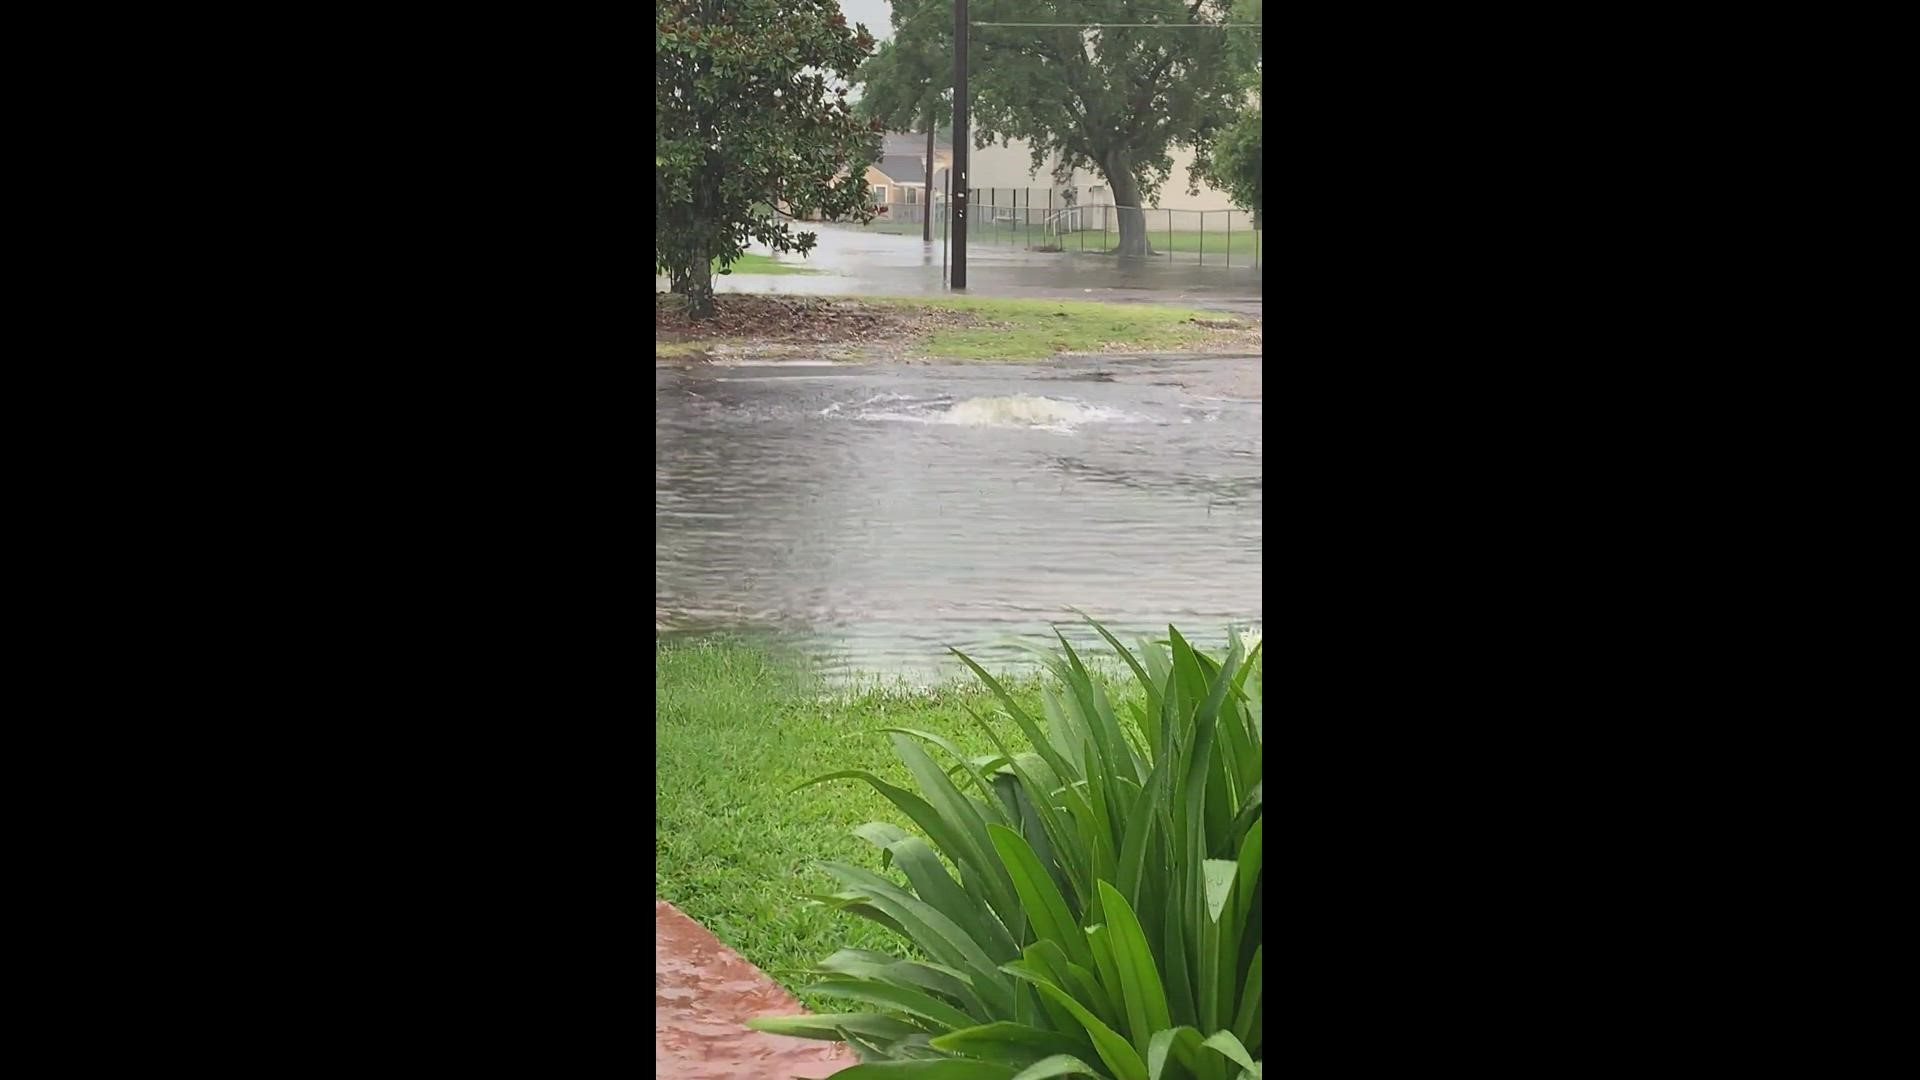 Viewer Video: Flooding on Prentiss in Gentilly
Credit: Kristi Jacobs